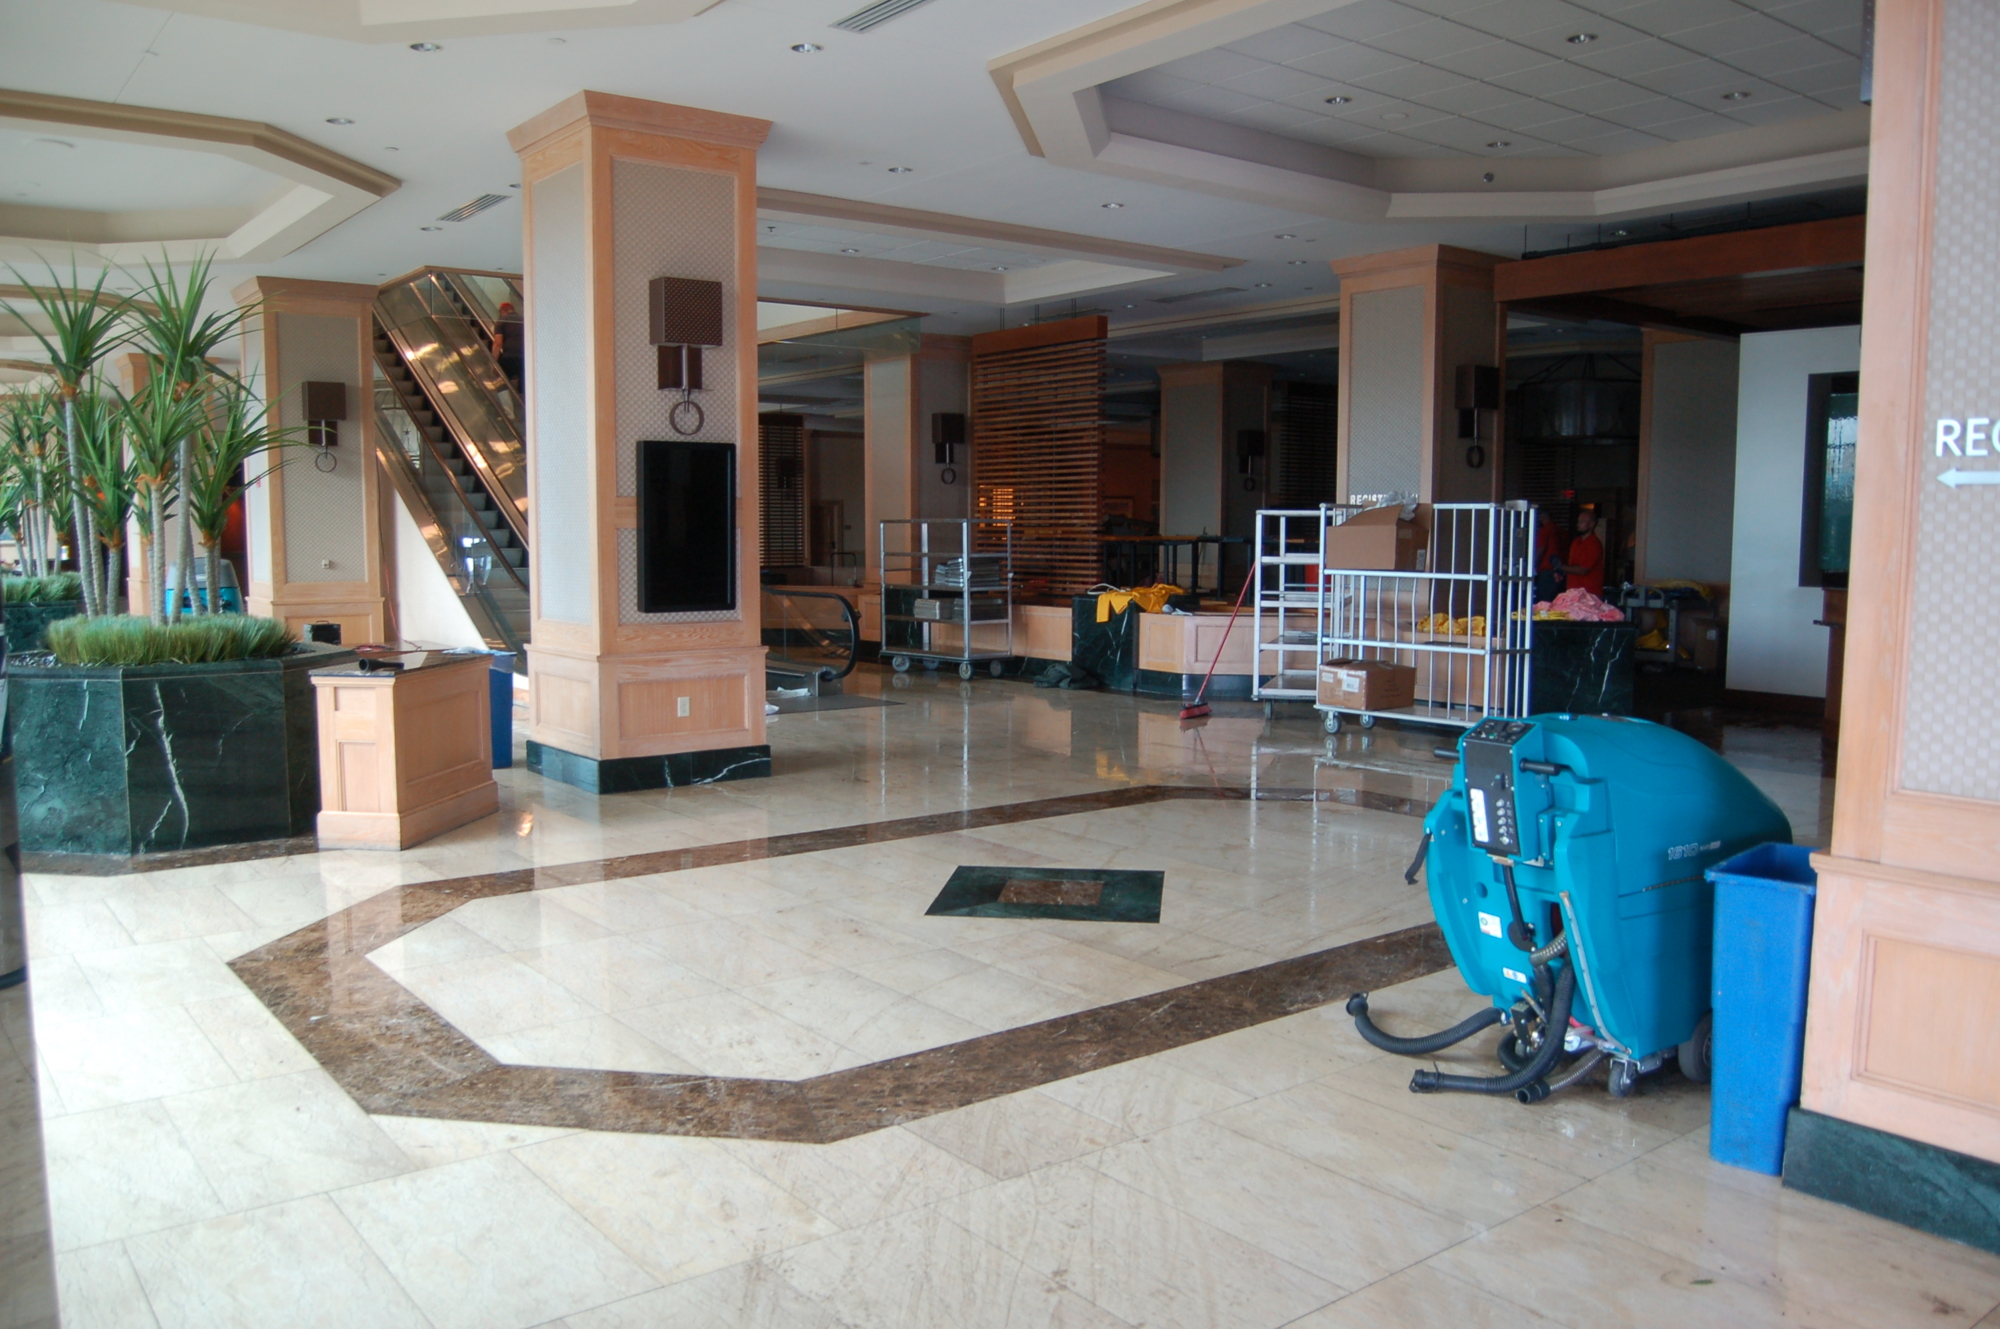 The lobby of the closed Hyatt Regency Jacksonville Riverfront Downtown. (Photo by Max Marbut)